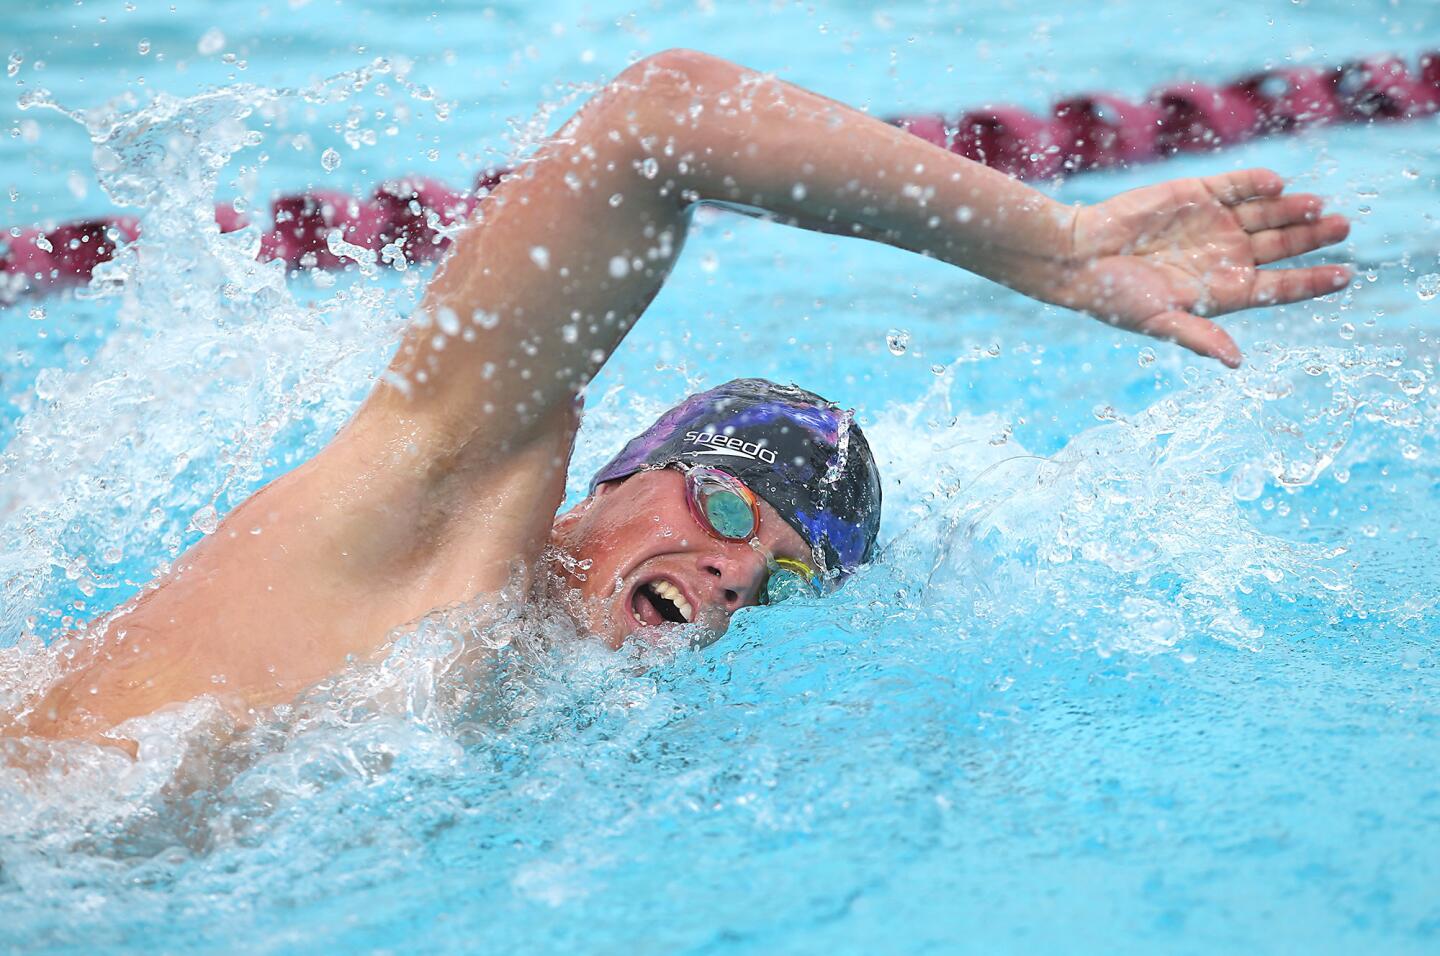 Costa Mesa's Augie Cunningham stretches for the finish line in the boys varsity 500 meter swim.